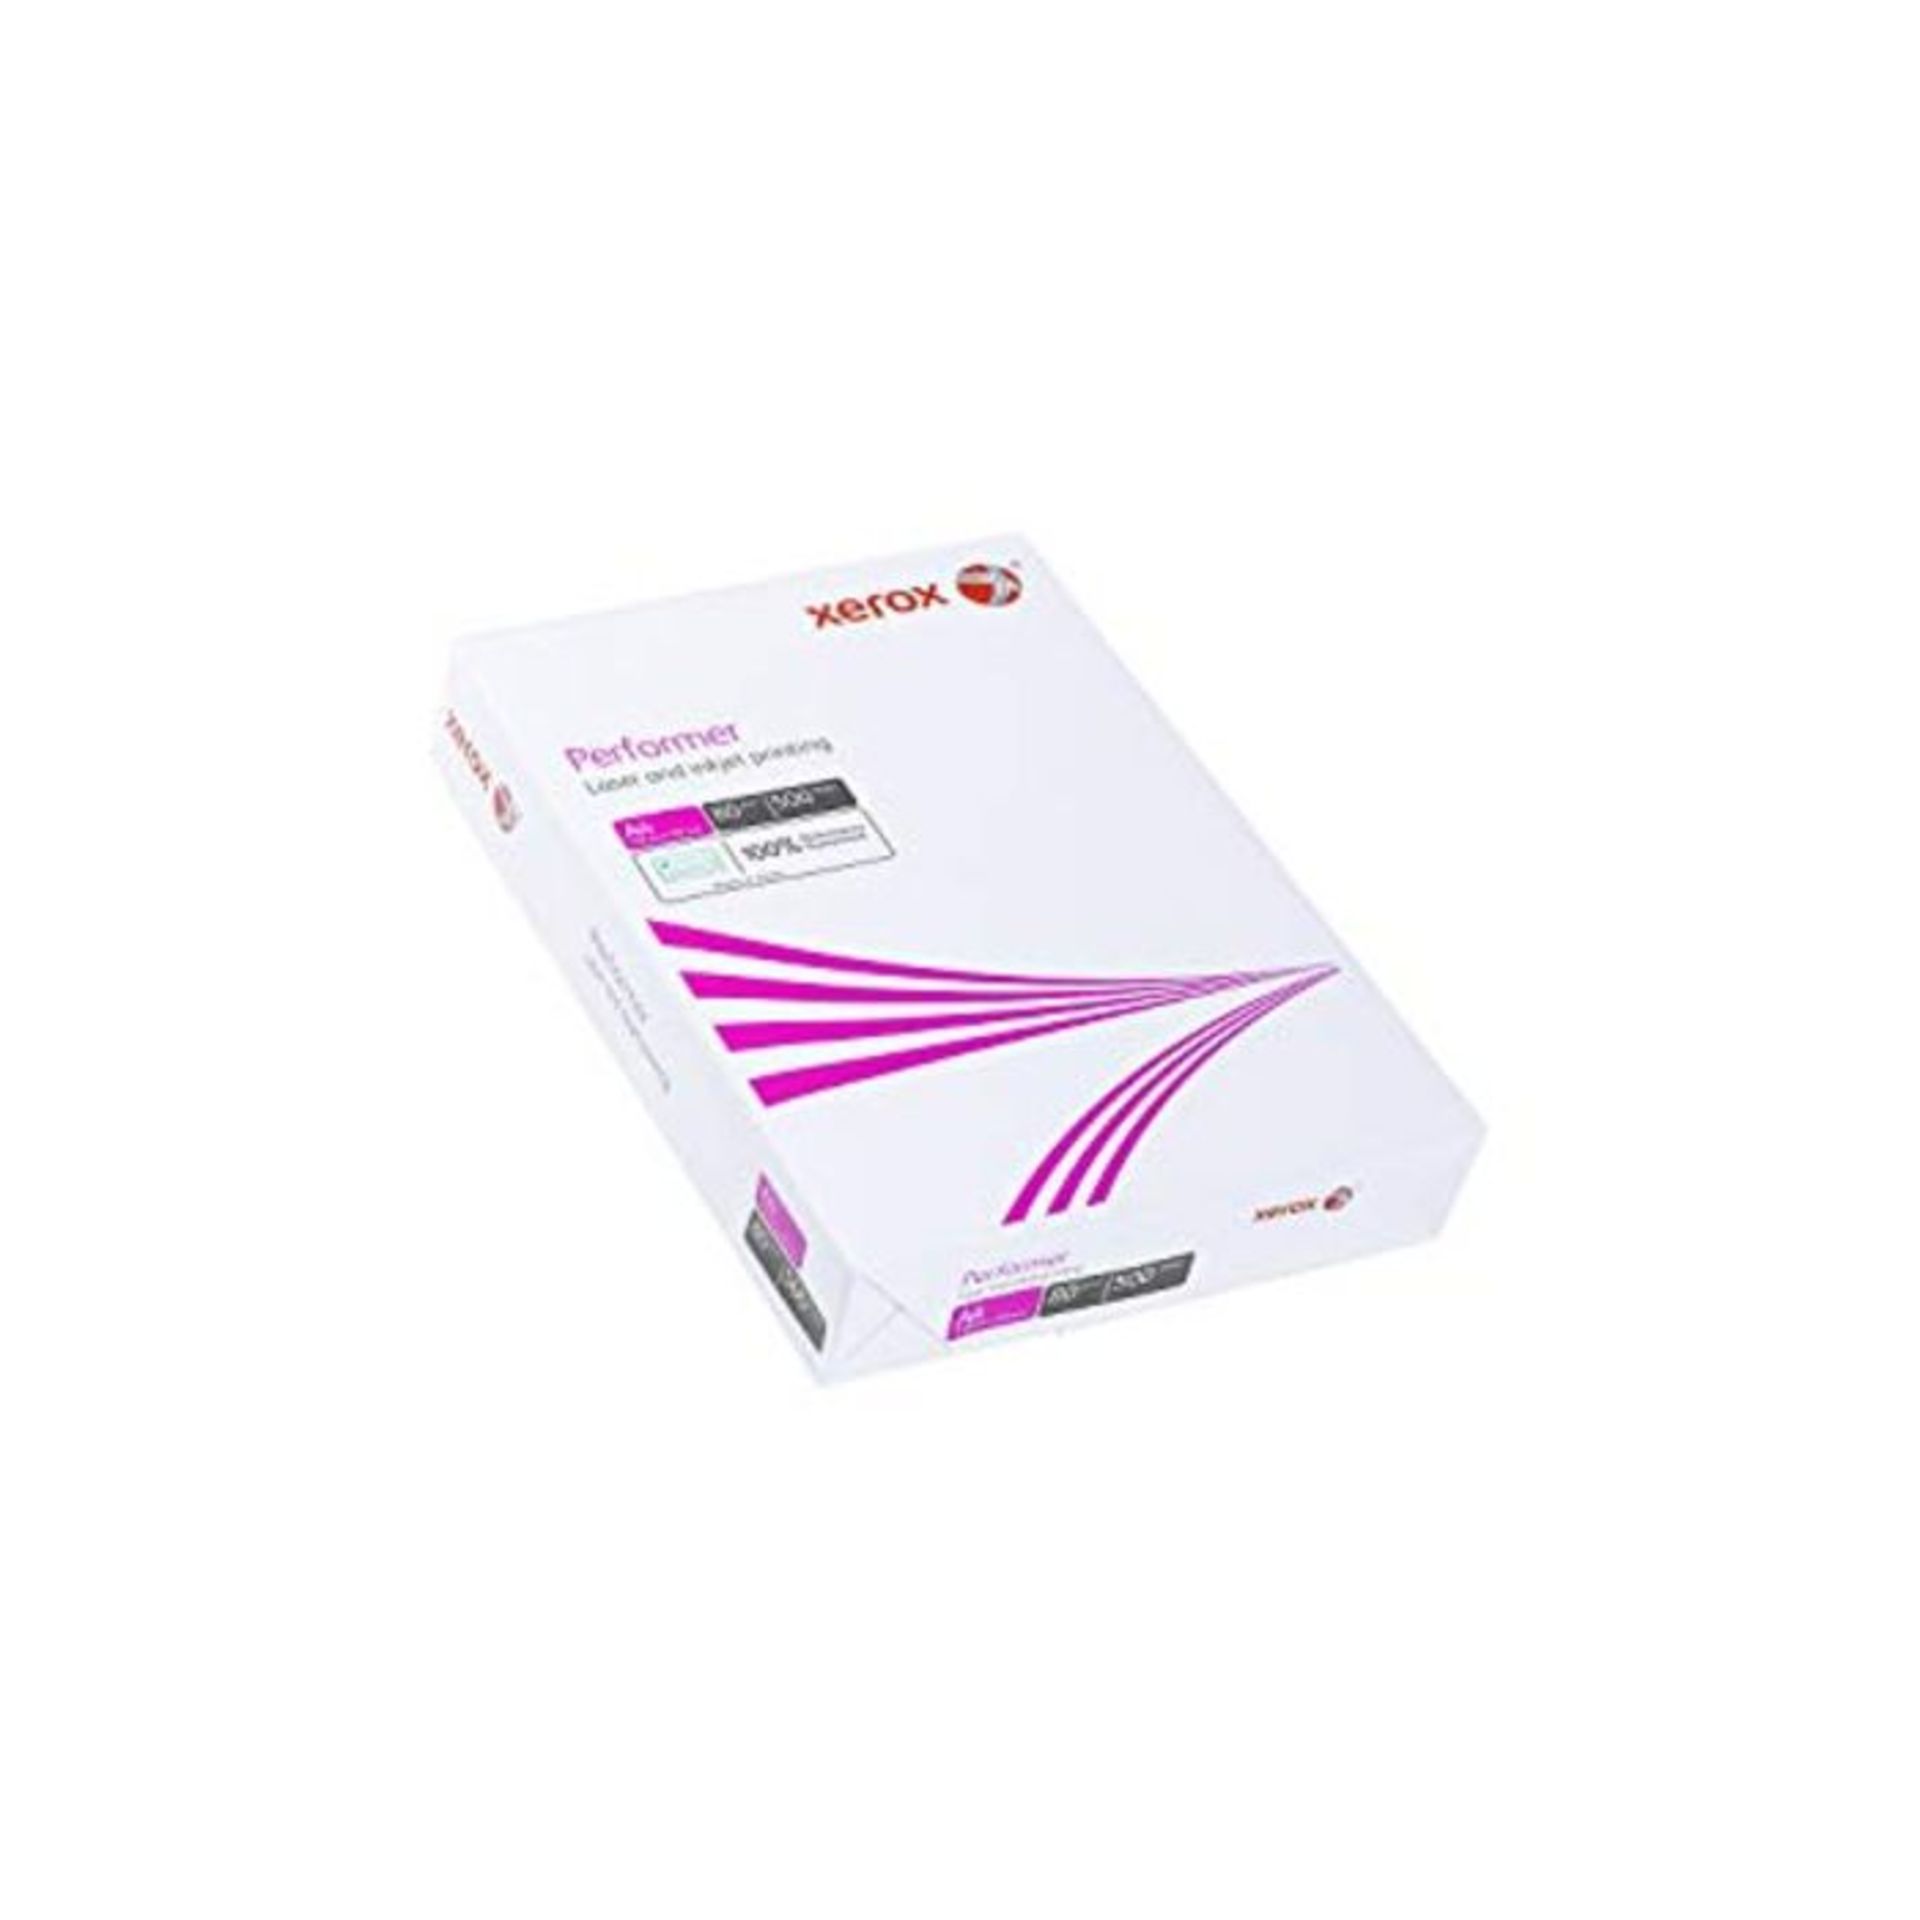 Xerox Performer Multifunctional Paper 80gsm 500 Sheets per Ream A3 White - Ref 003R905